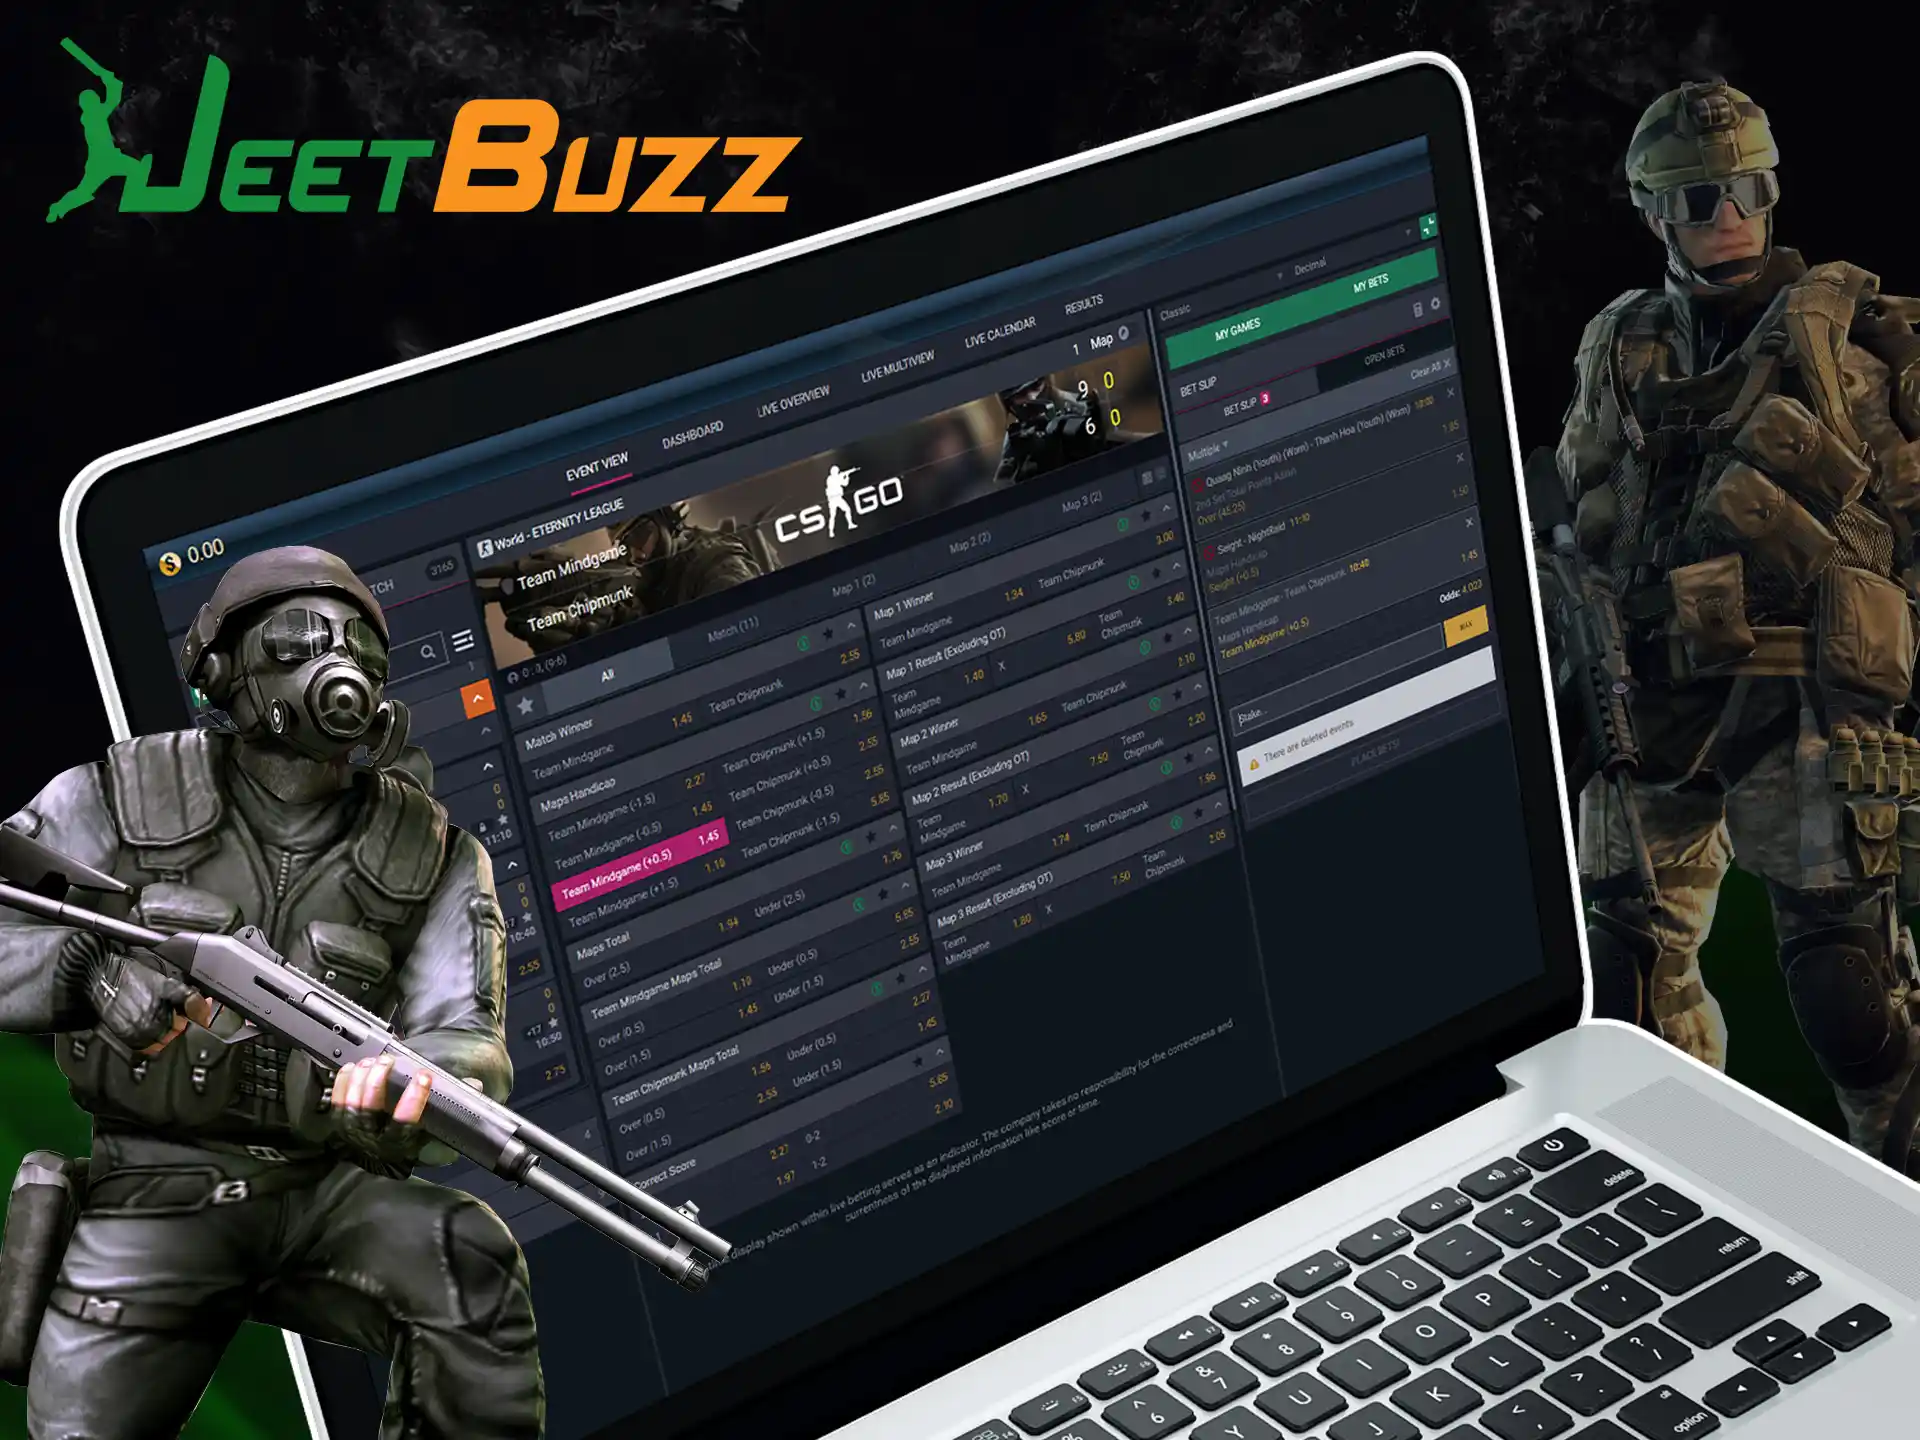 Counter Strike is a excellent esport to bet on at JeetBuzz.